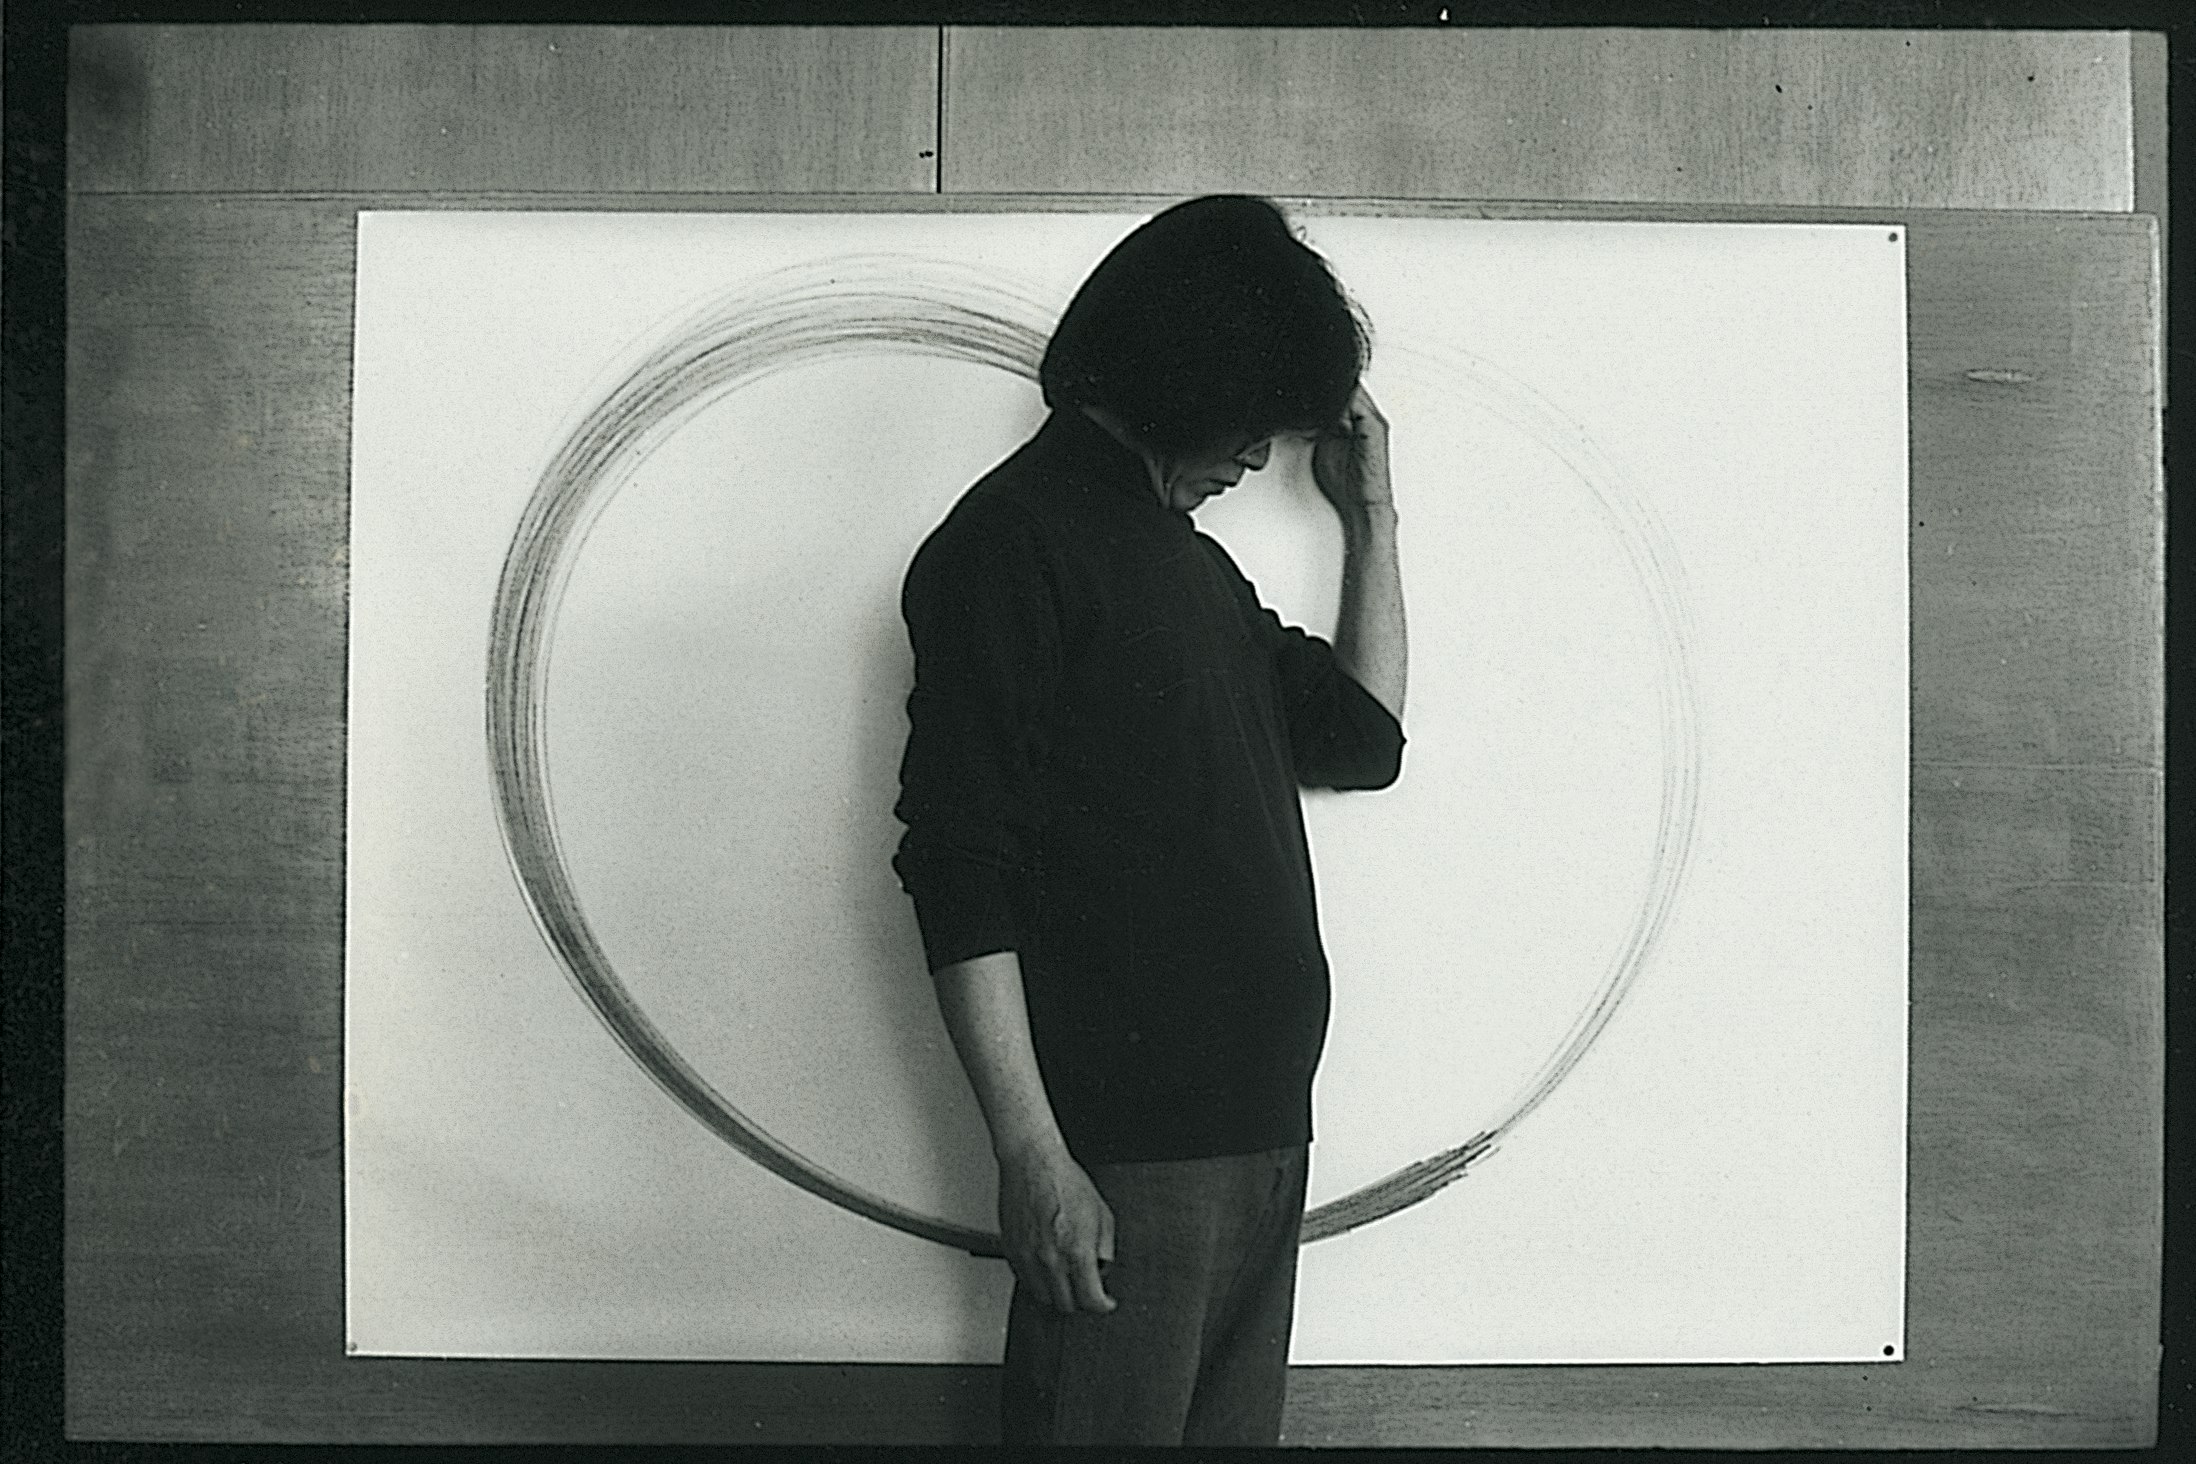 Side profile of a young Lee Kun-Yong, with shoulder length black hair and a black sweater, stands against a white canvas with a circular brushstroke. He is looking downwards with his hand lifted to his forehead.